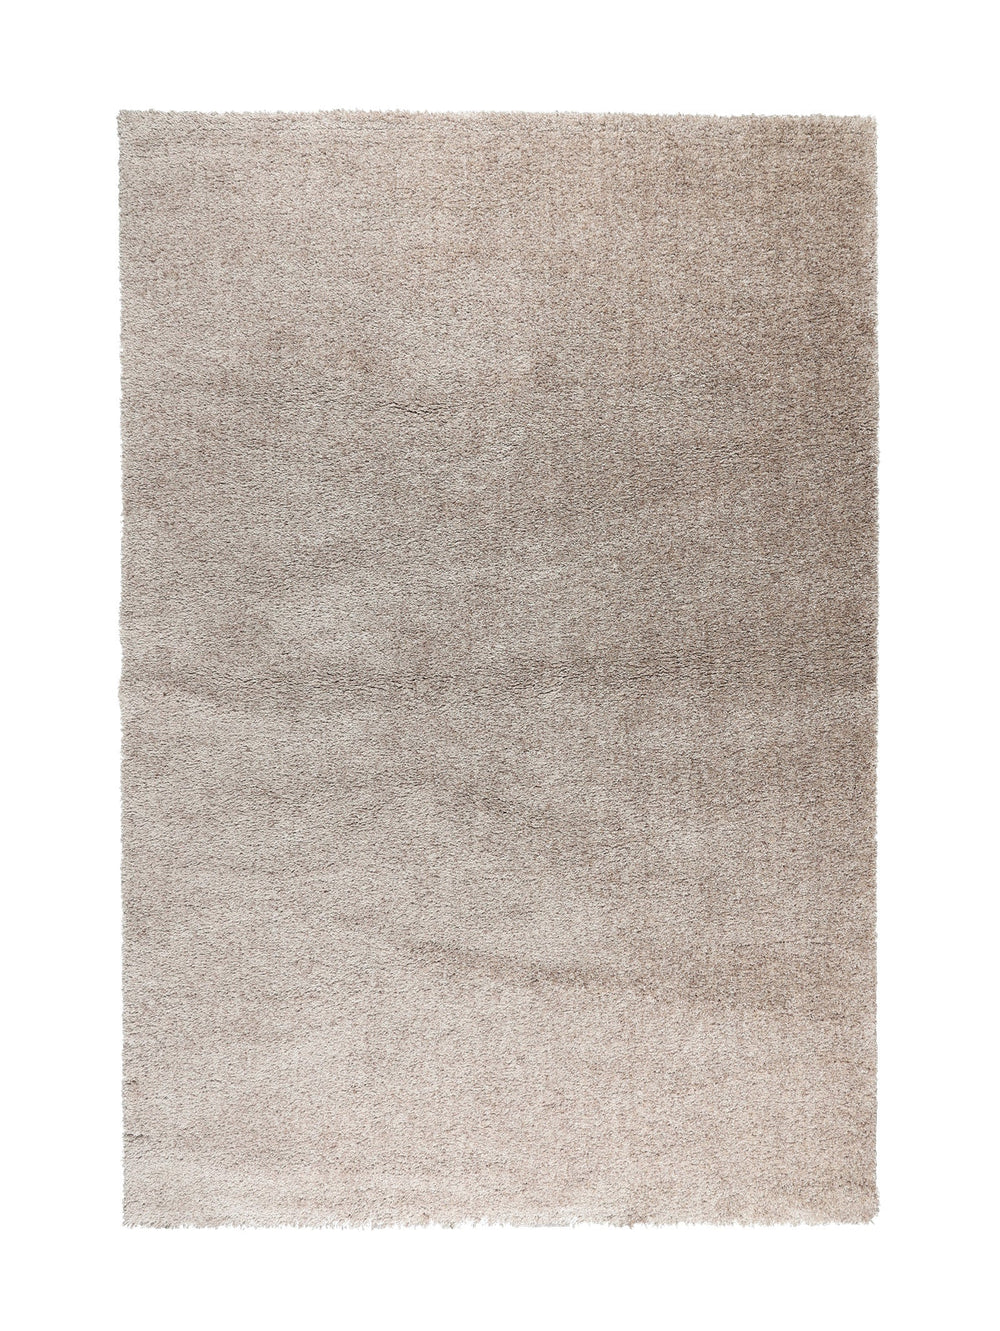 Reflection Rug - Rugs- Hertex Haus Online - Extra Large